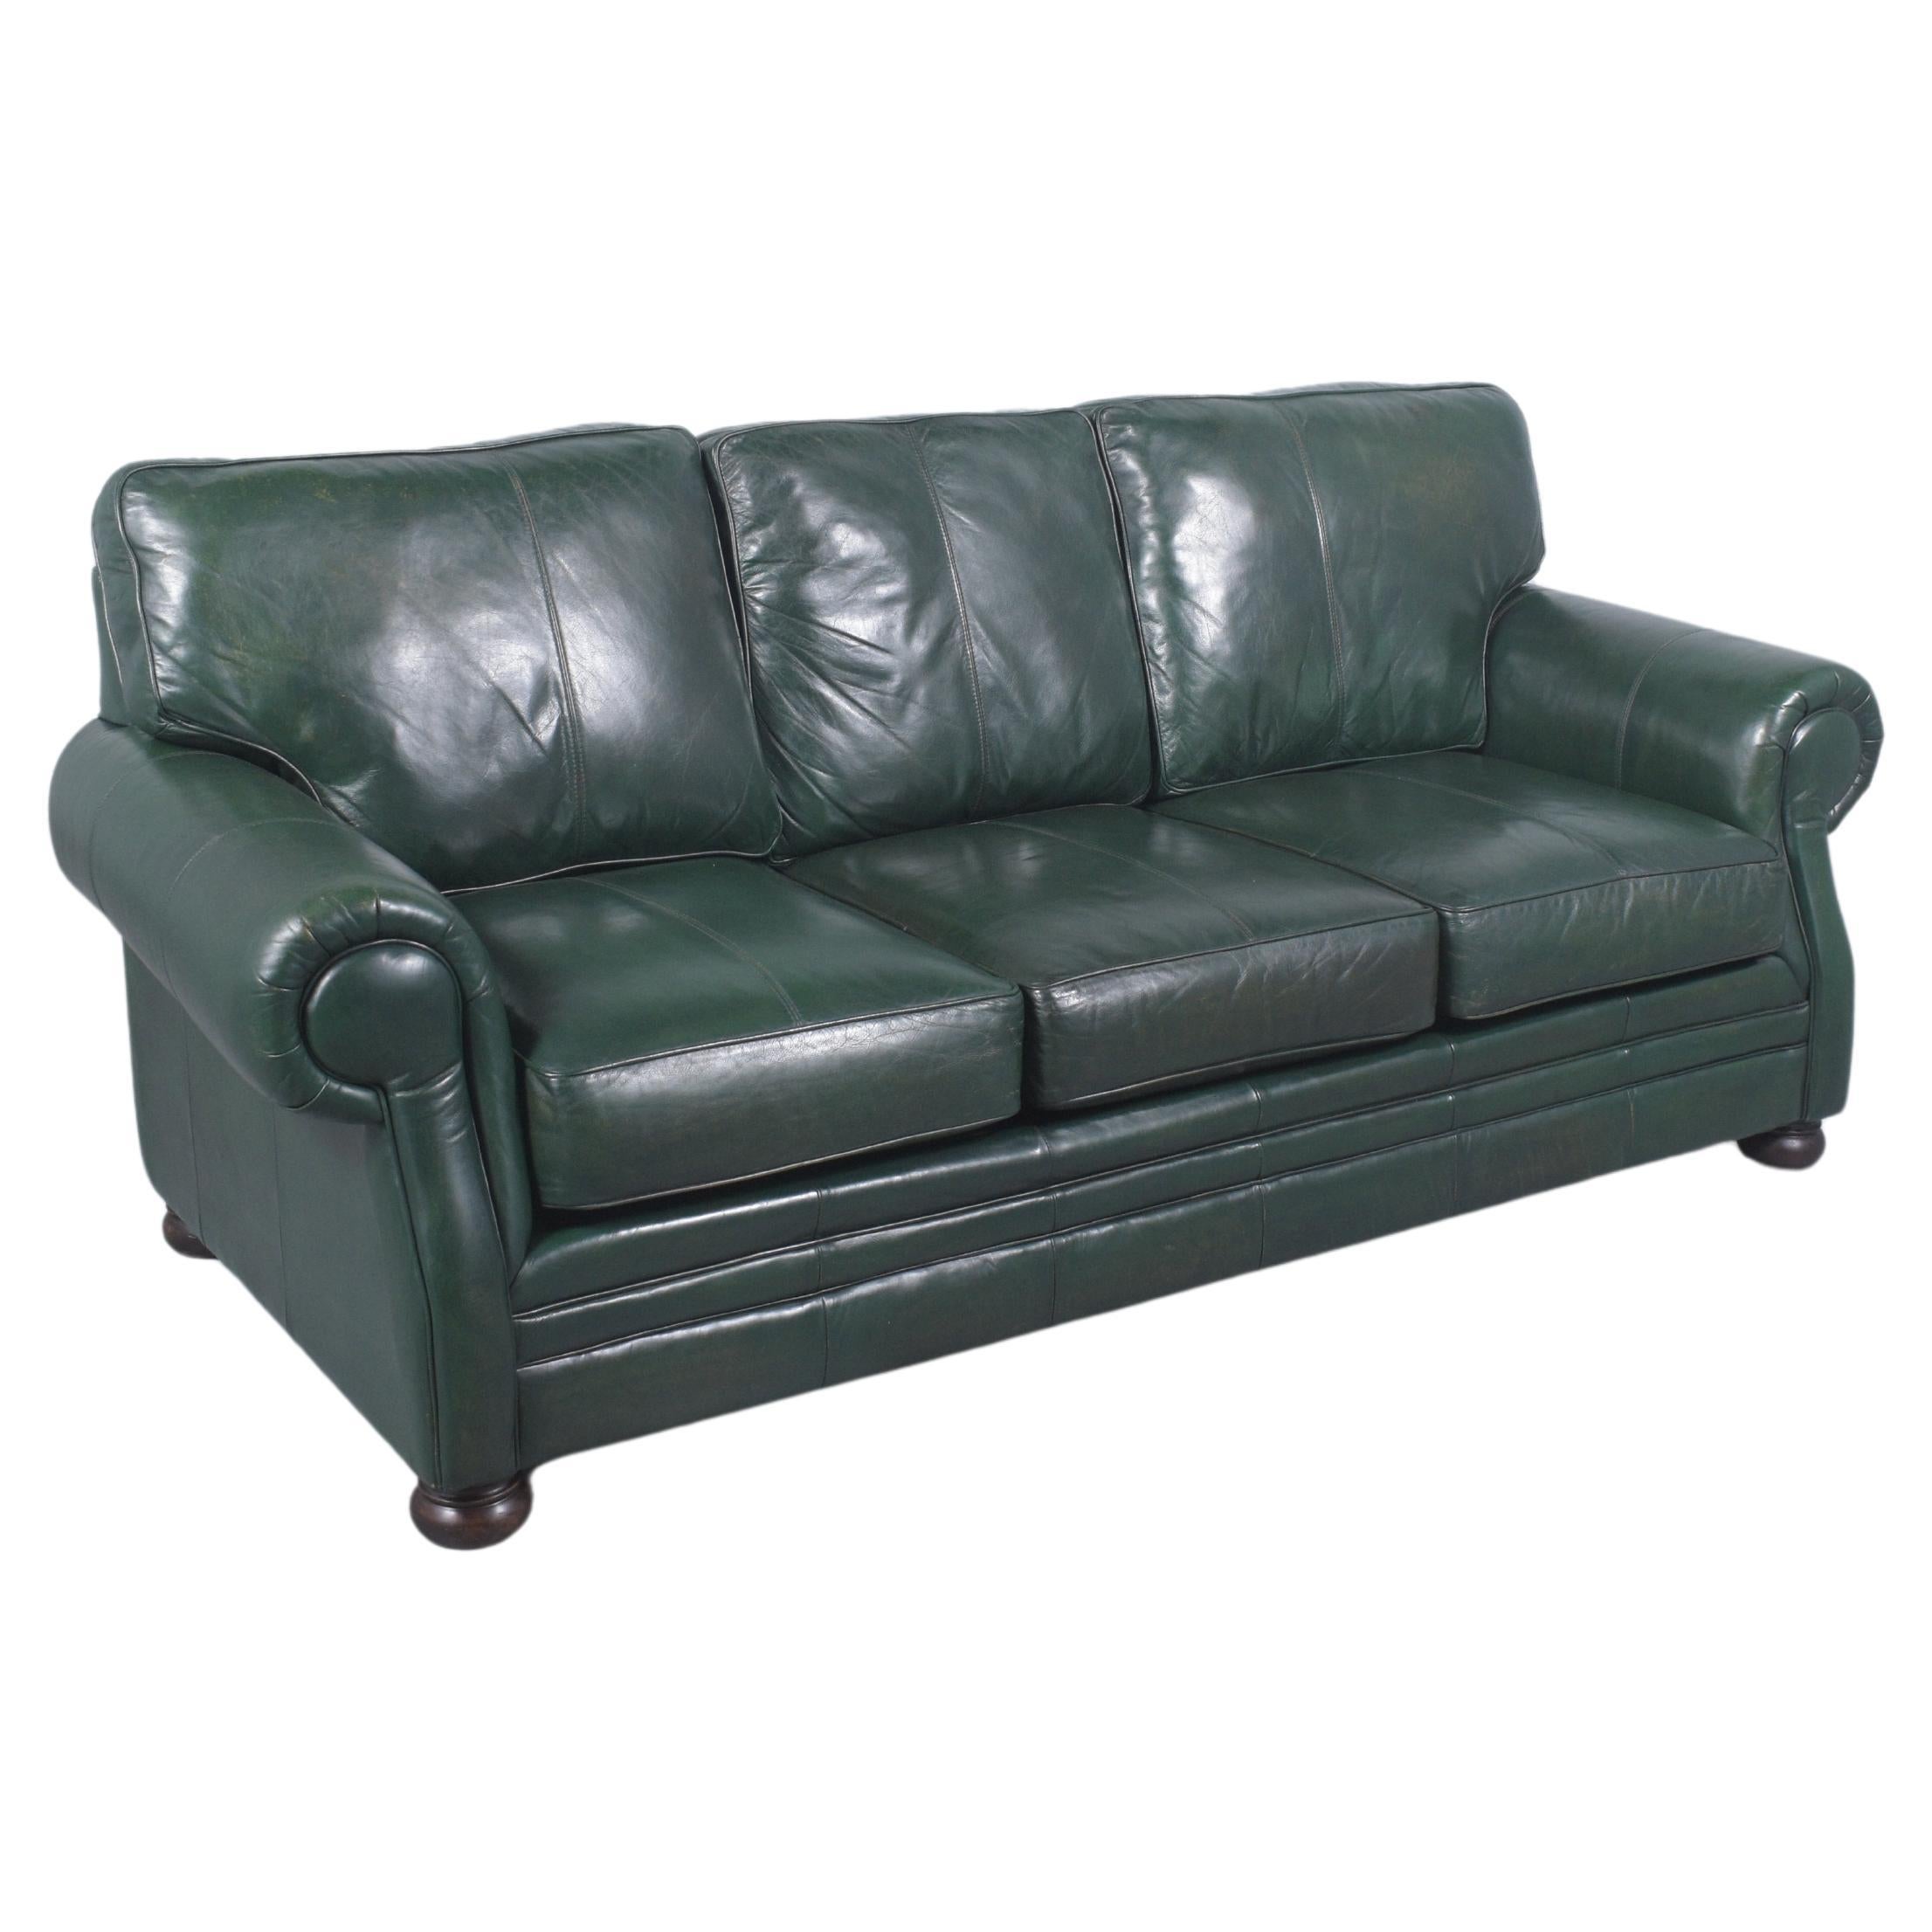 Restored 1980s Vintage Leather Sofa in Dark Green with Carved Bun Legs For Sale